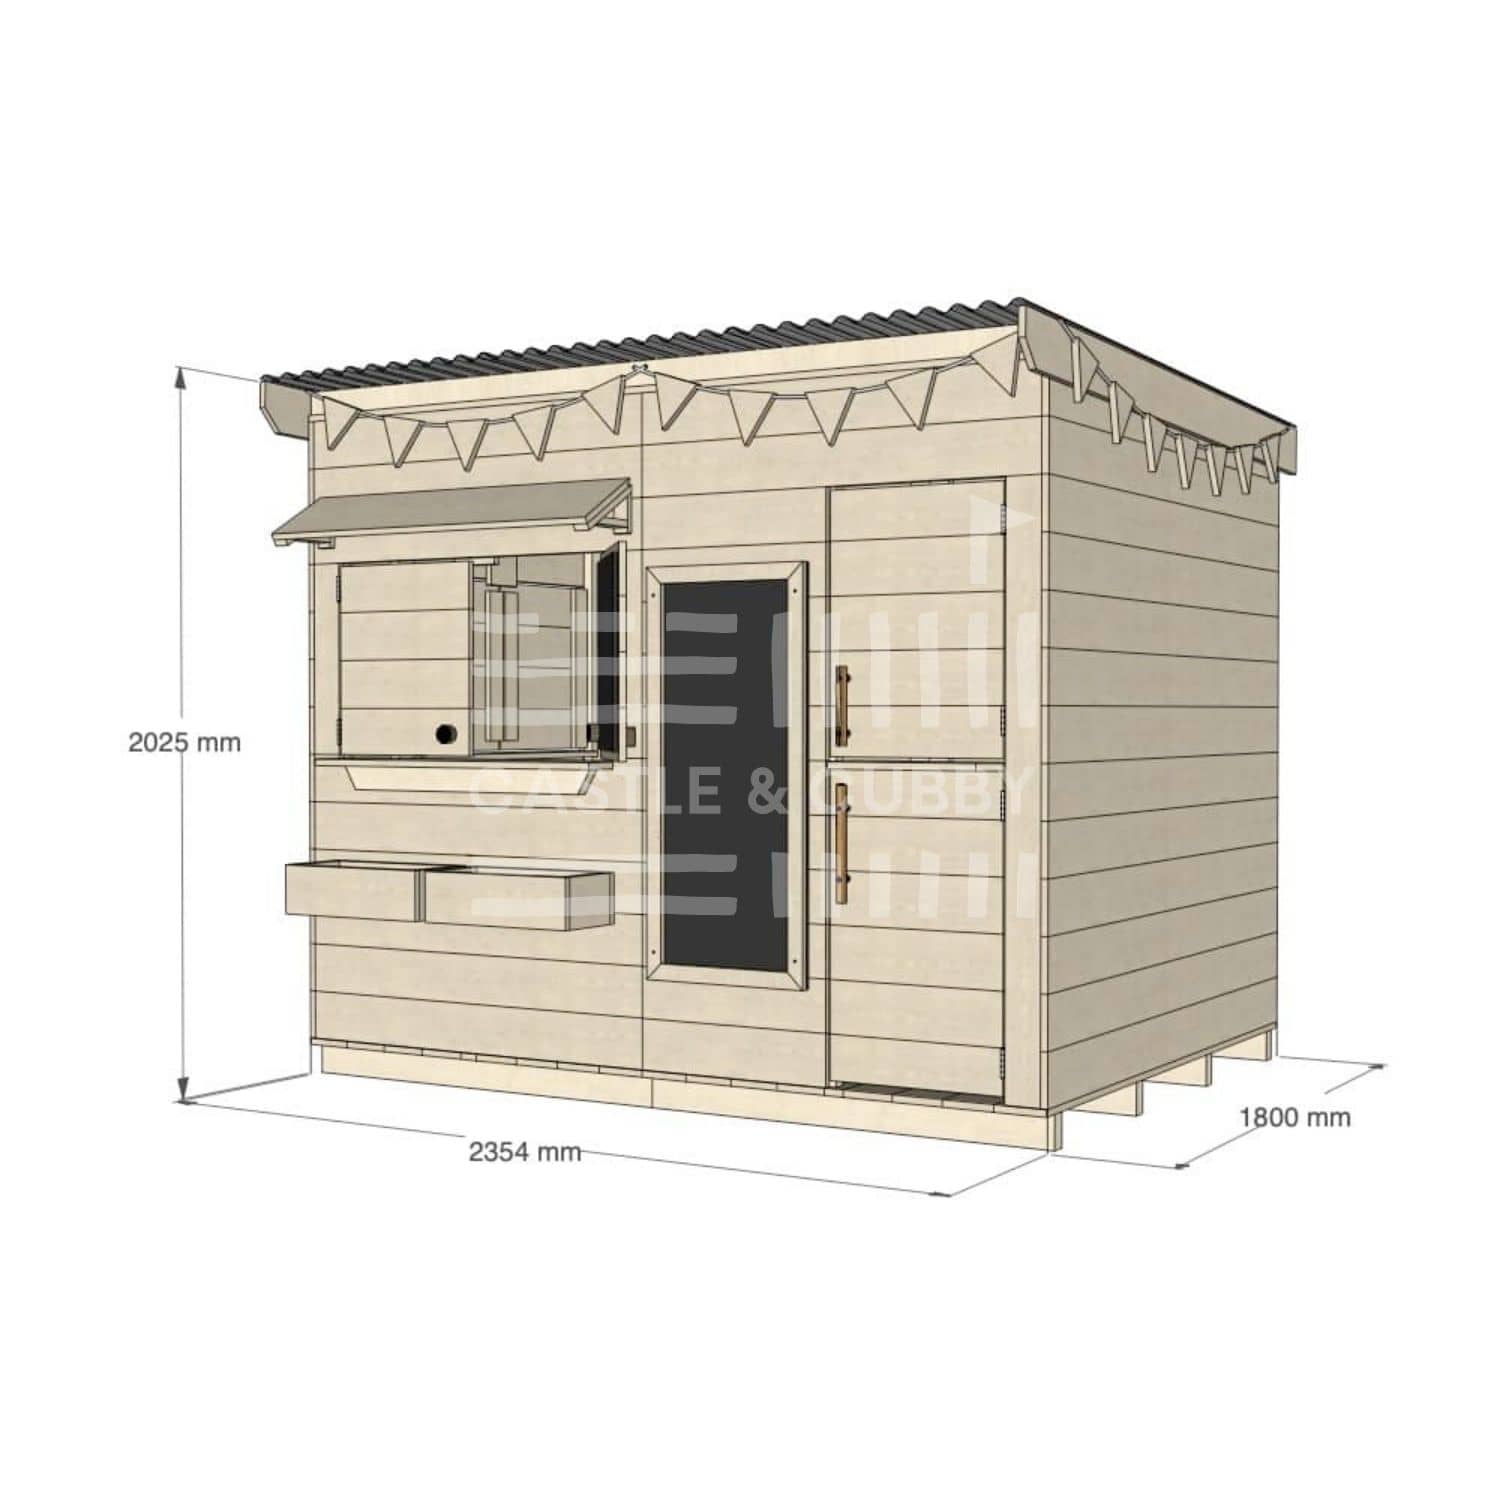 Flat roof extended height raw pine timber cubby house domestic large rectangle size with accessories